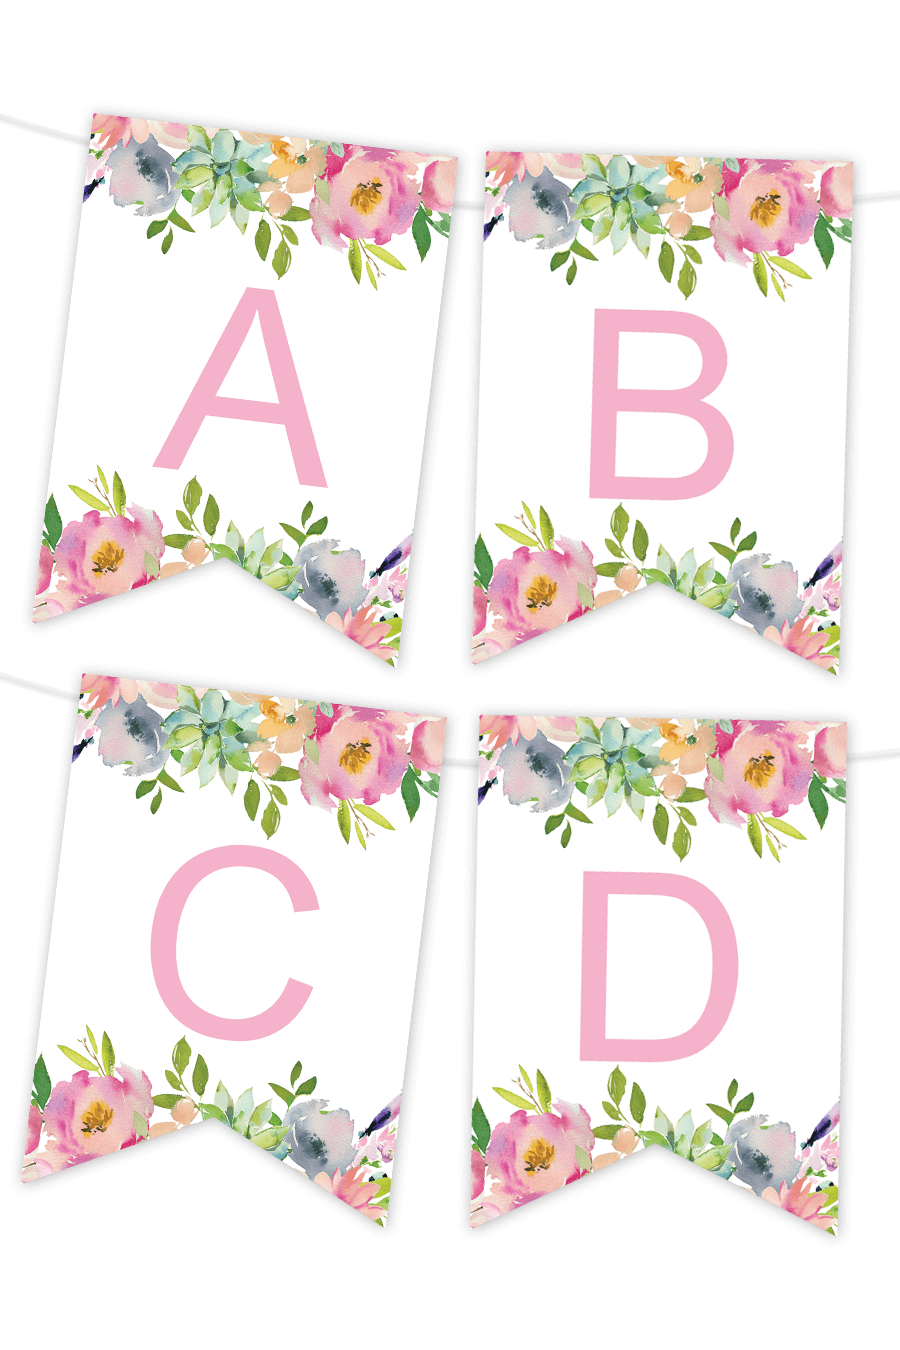 Impertinent Free Printable Banner Templates | Kenzi's Blog Pertaining To Free Printable Party Banner Templates